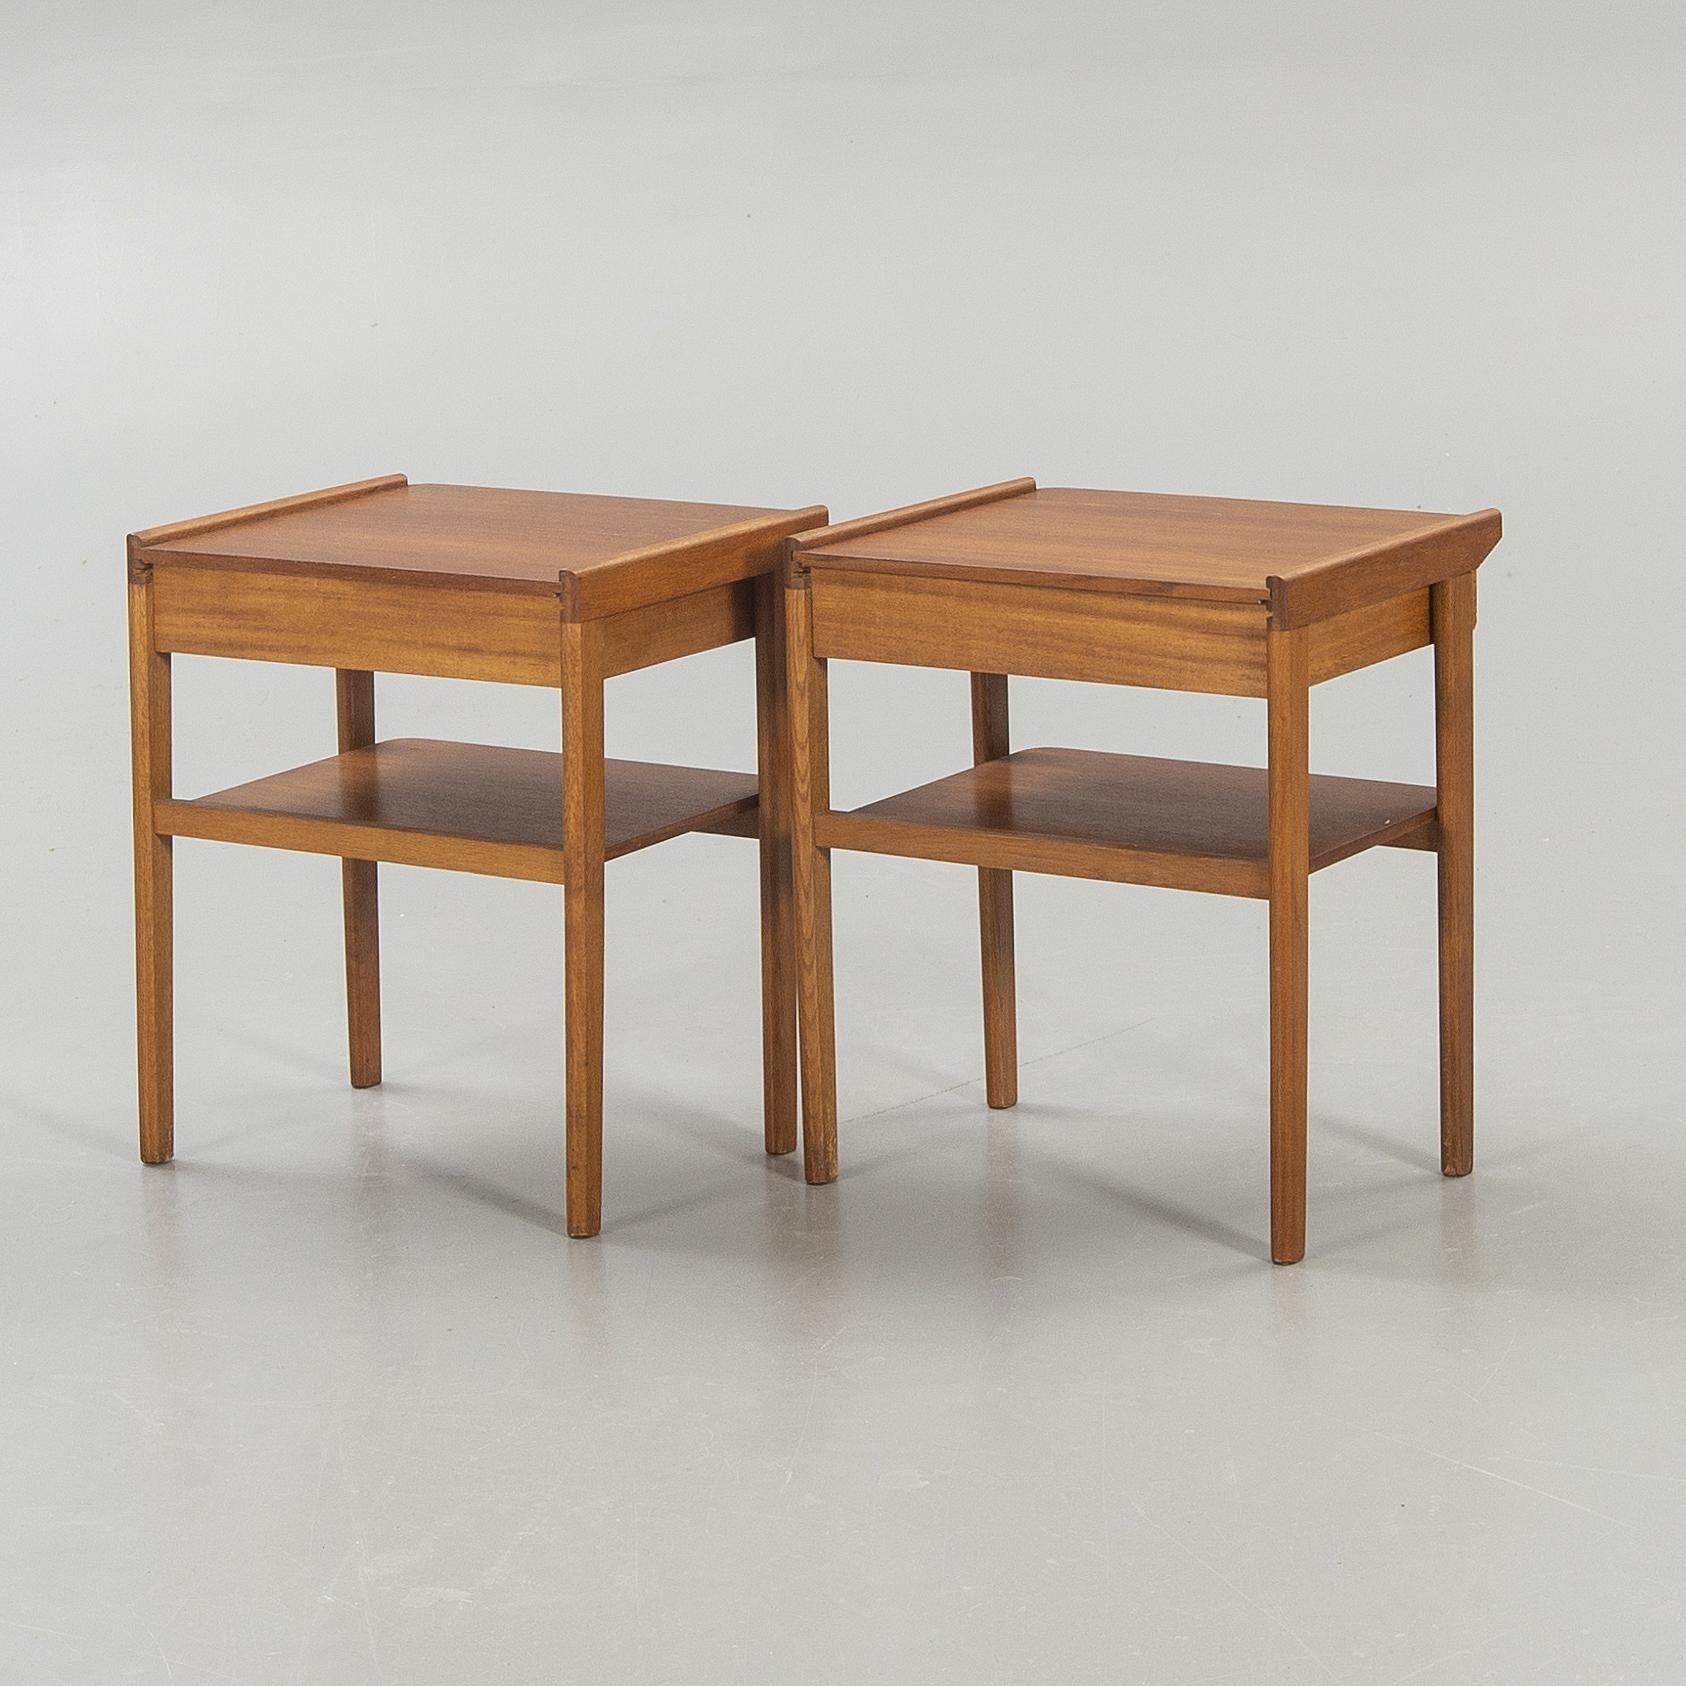 Teak nightstands a pair Anonymous Sweden 1960
a pair of nightstands with 2 drawers in Teak wood not signed.
Nice details and good vintage condition, some light scratches.